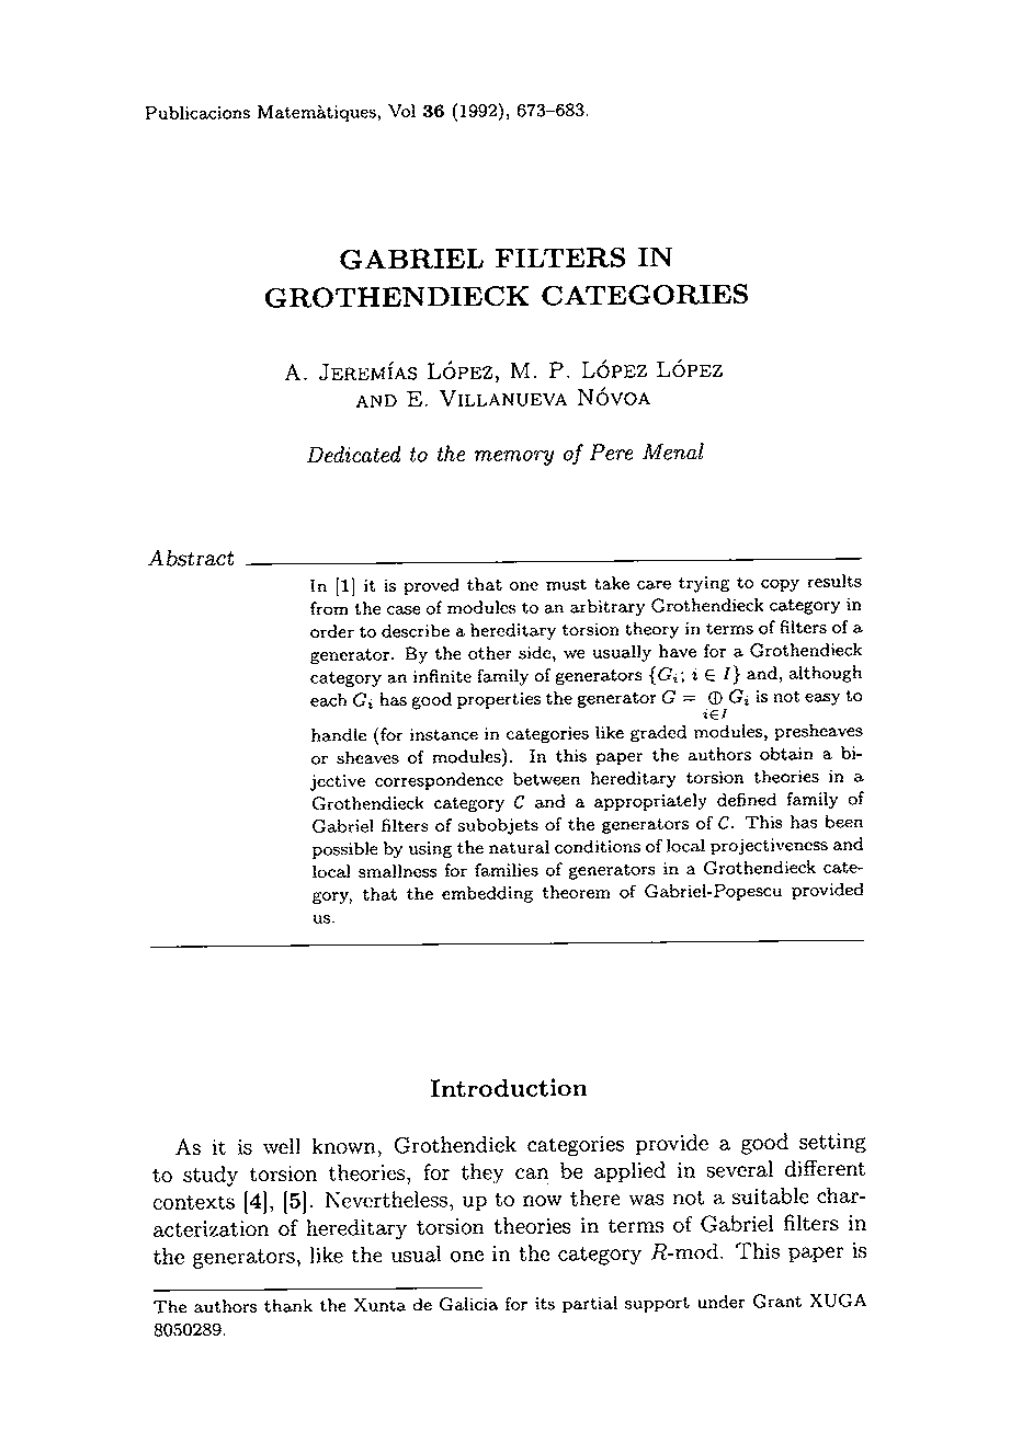 Abstract GABRIEL FILTERS in GROTHENDIECK CATEGORIES